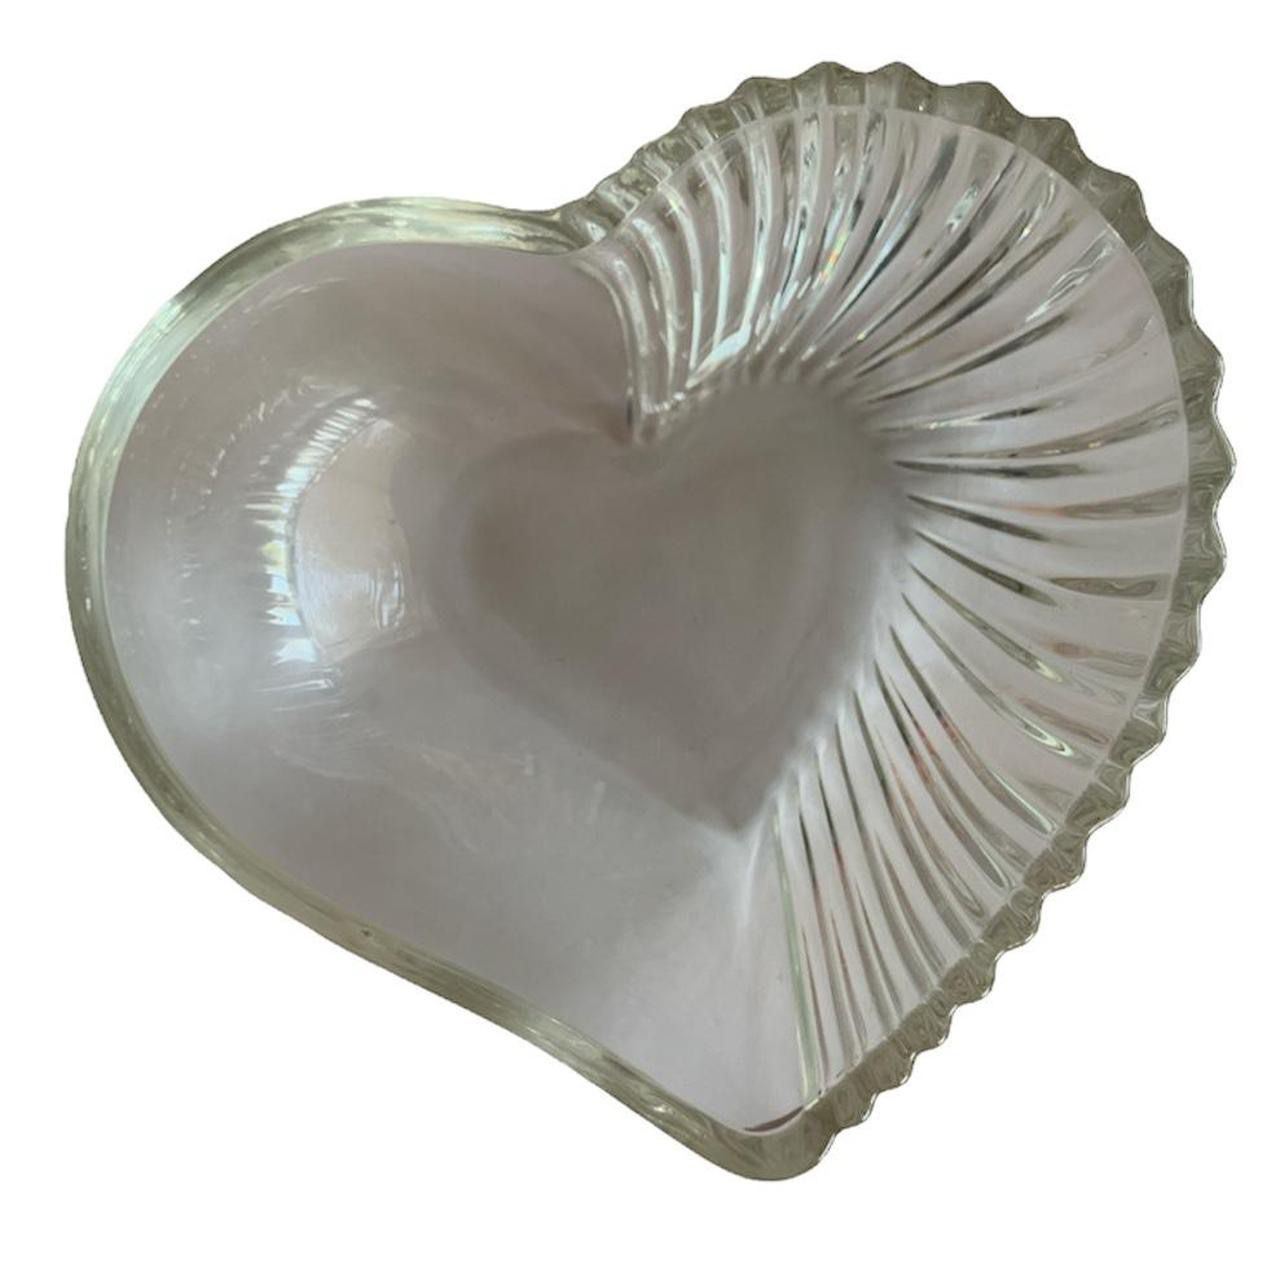 Glass heart for Jewelry, Crystals, Healing Stones Etc 